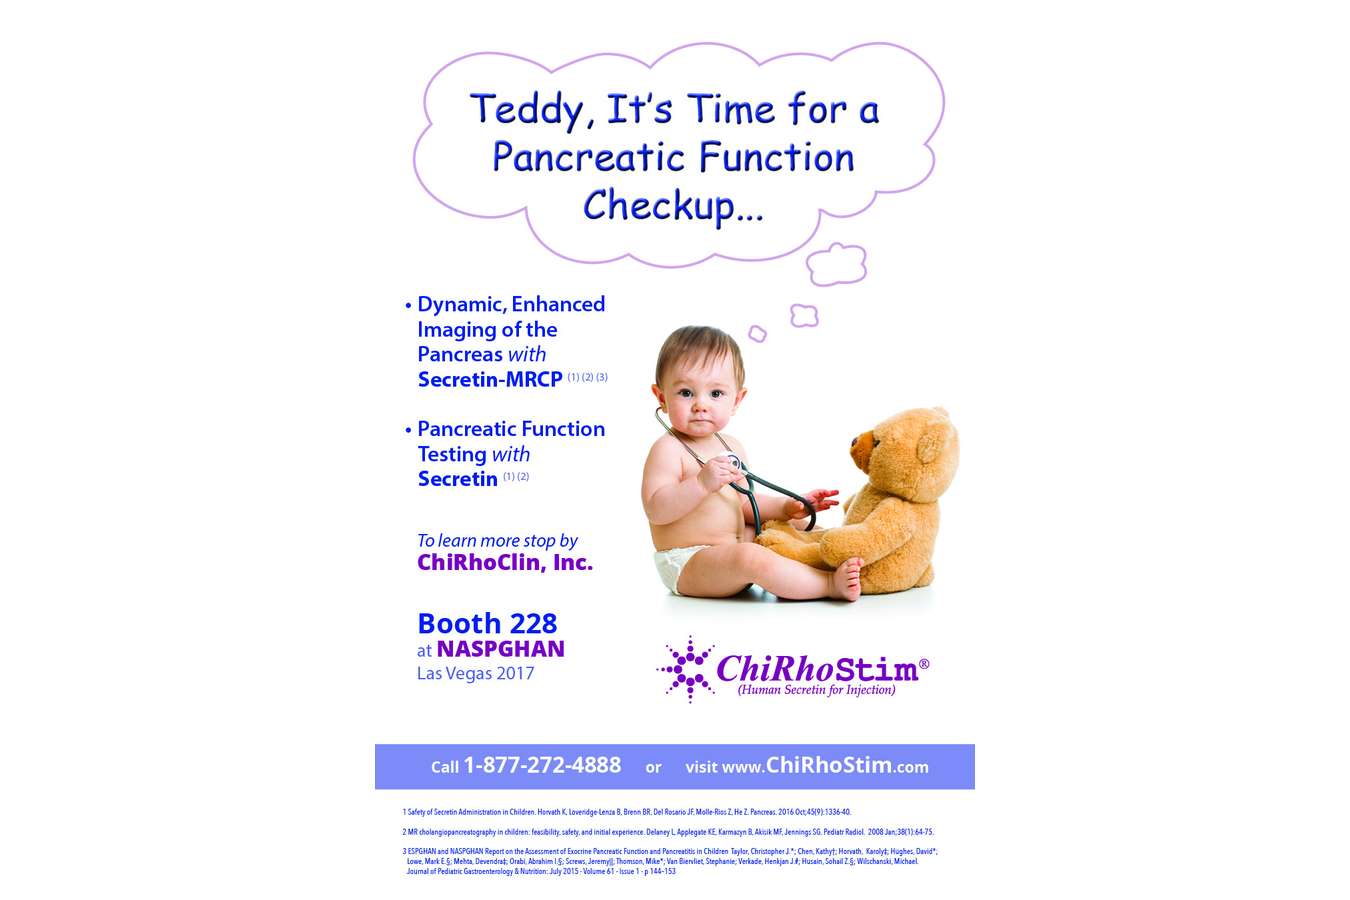 Chirhostim Dr Baby Bear : Handout for North American Society for Pediatric Gastroenterology, Hepatology and Nutrition trade show